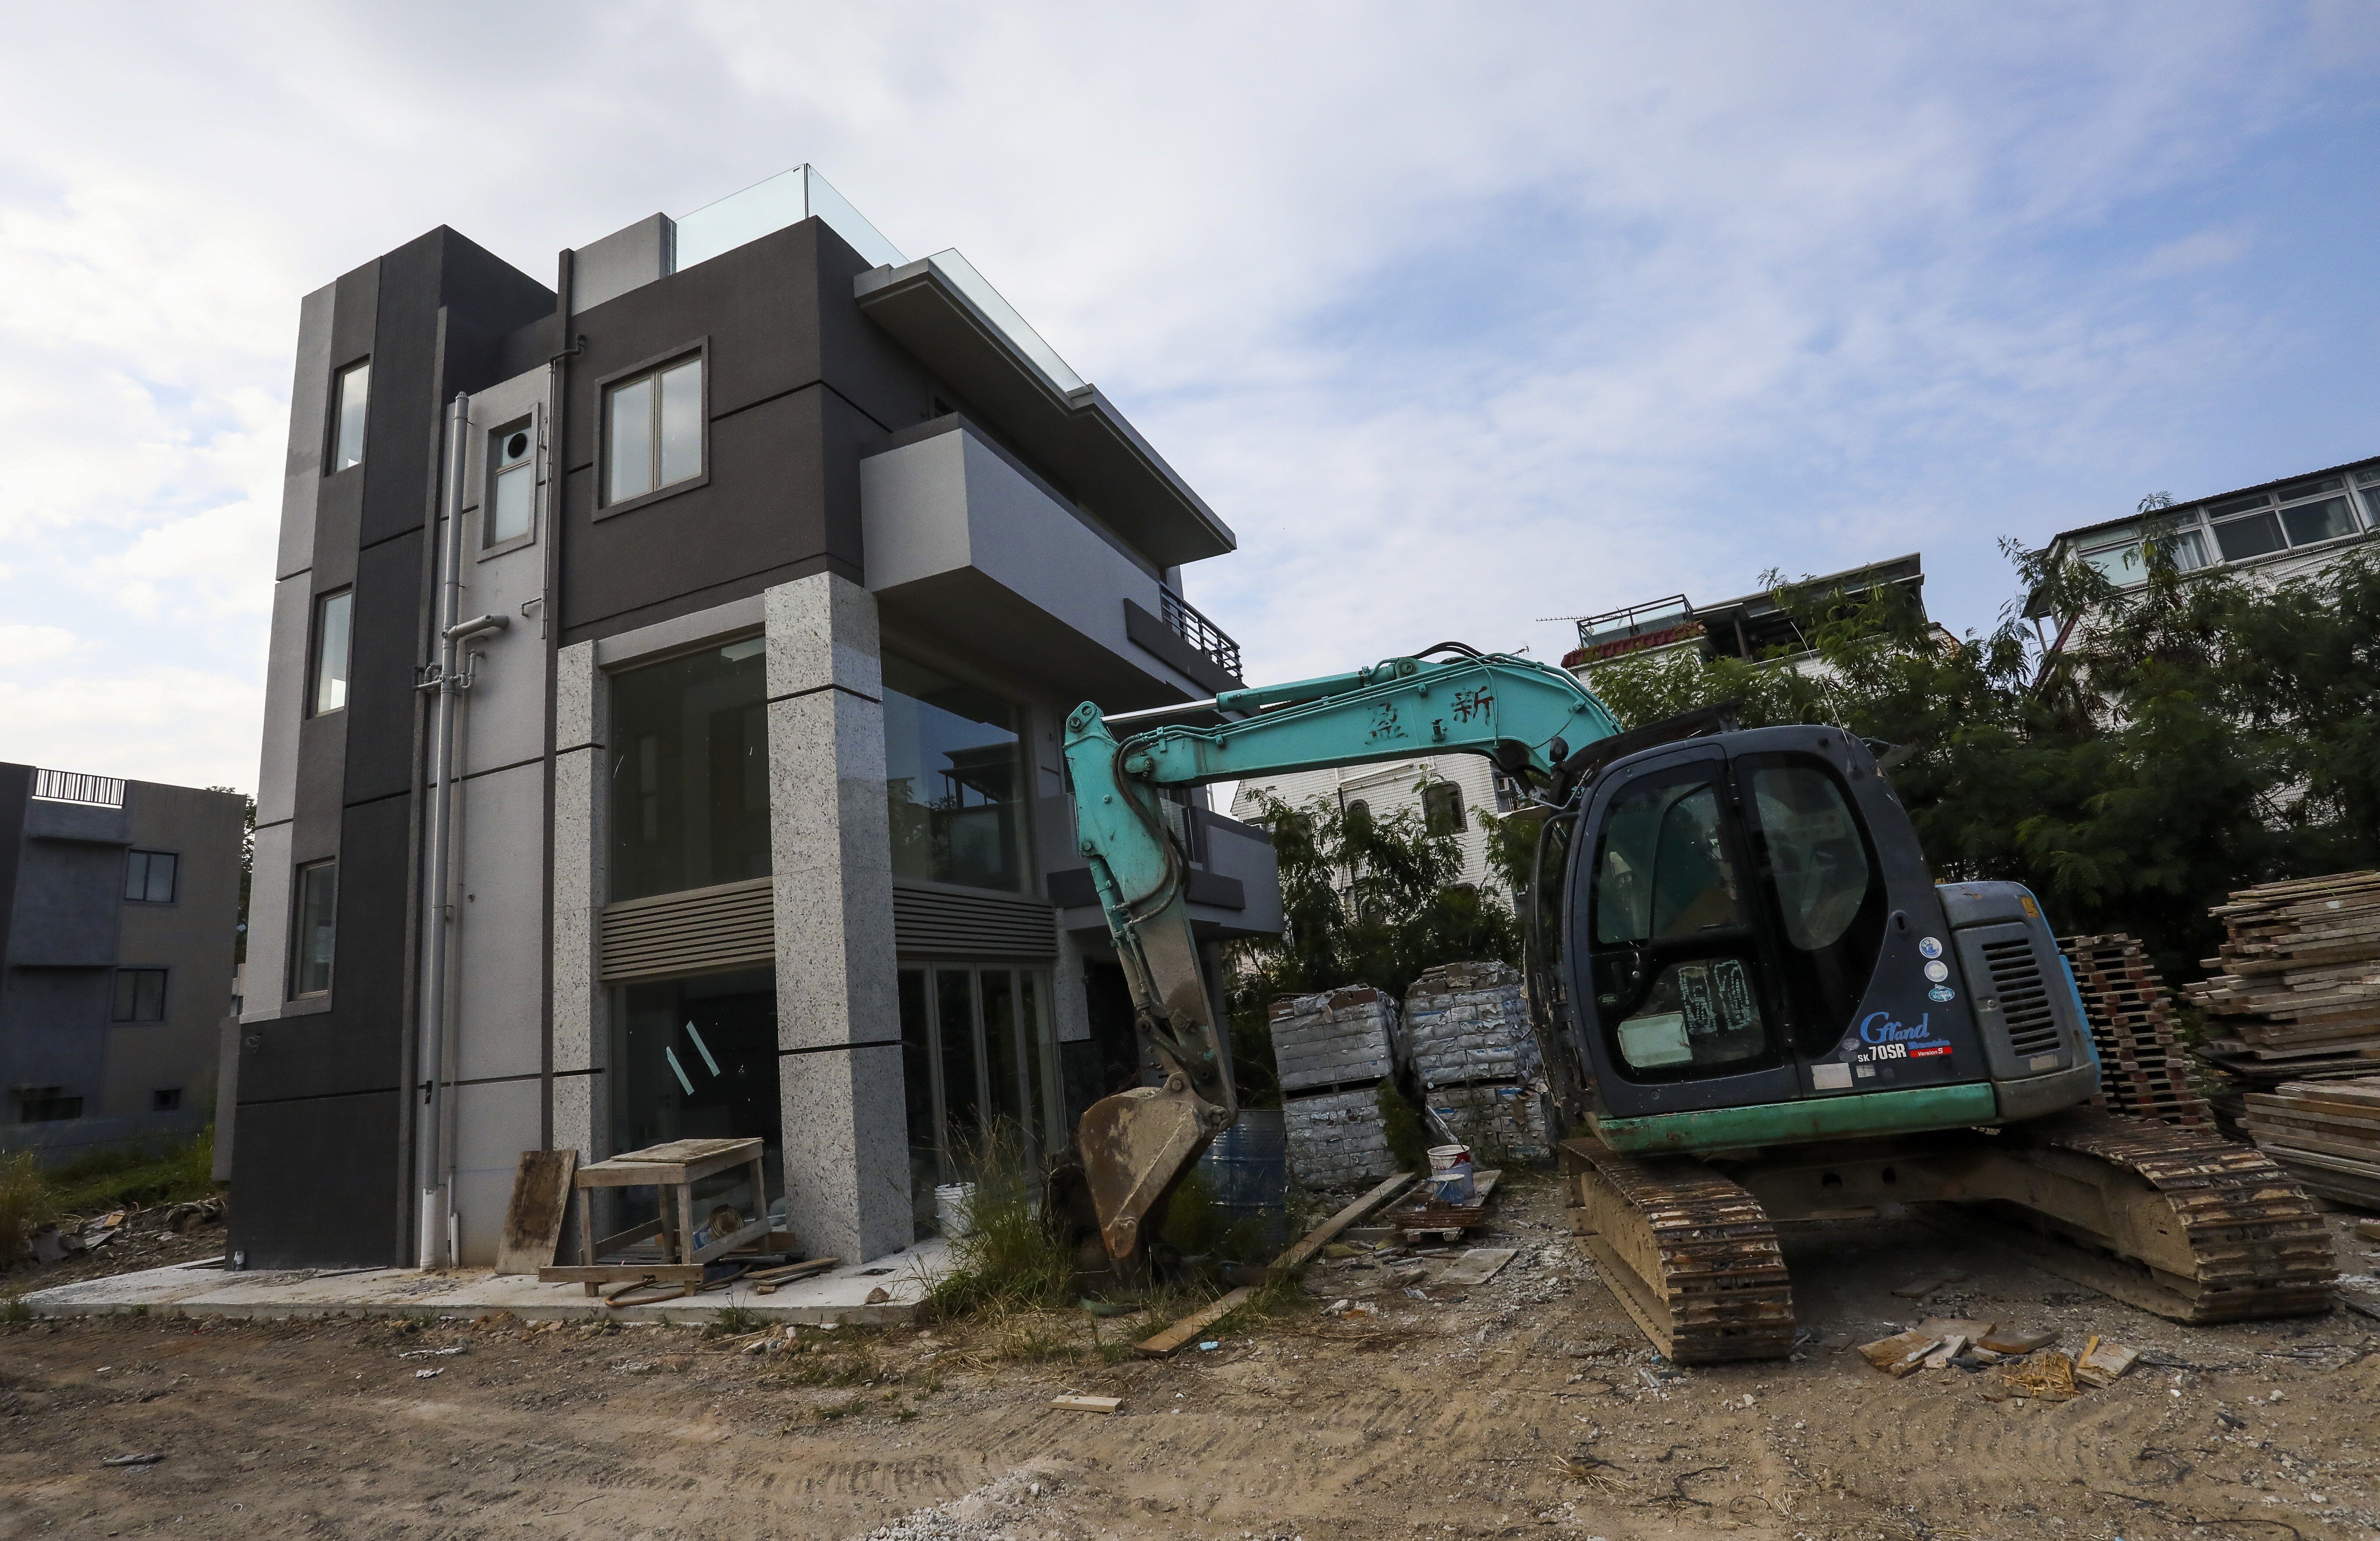 A village house under construction in Yuen Long in October 2020. Photo: Jonathan Wong